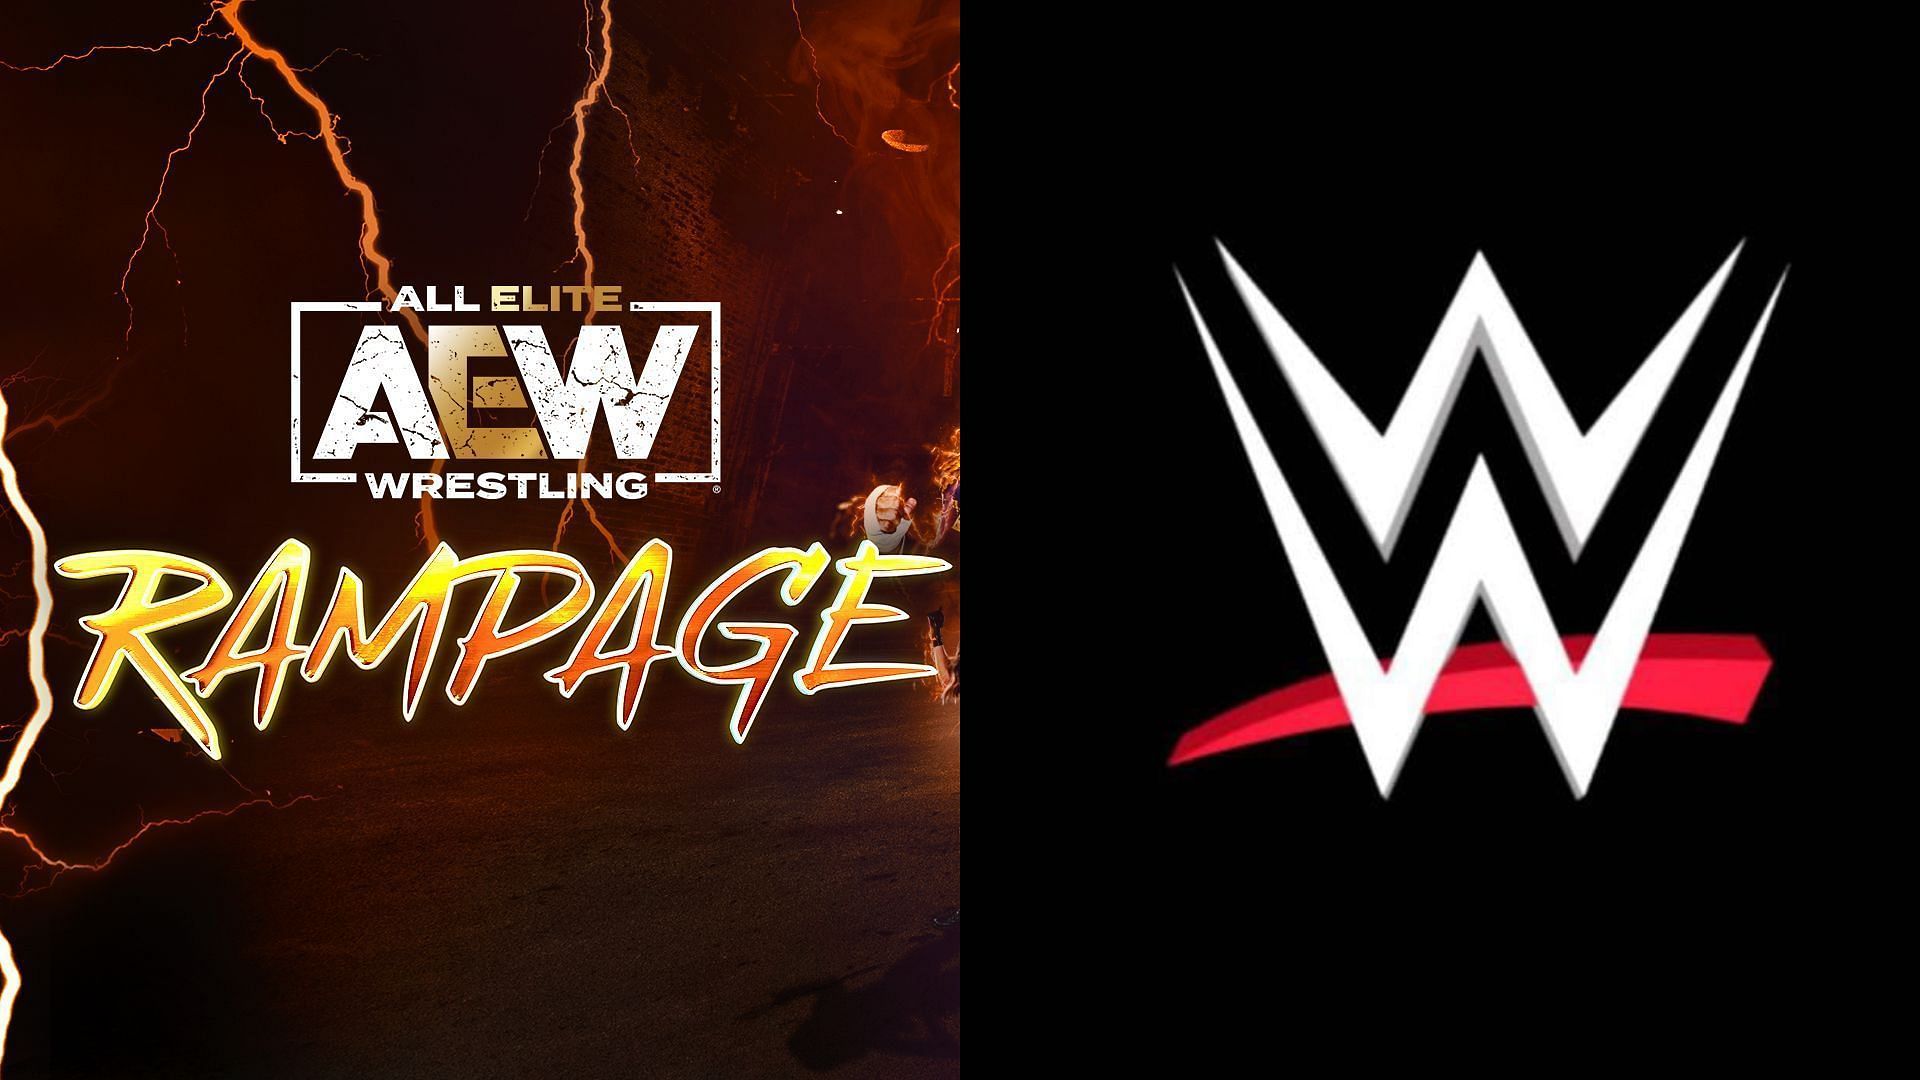 Find out which Former WWE star made his return on AEW Rampage